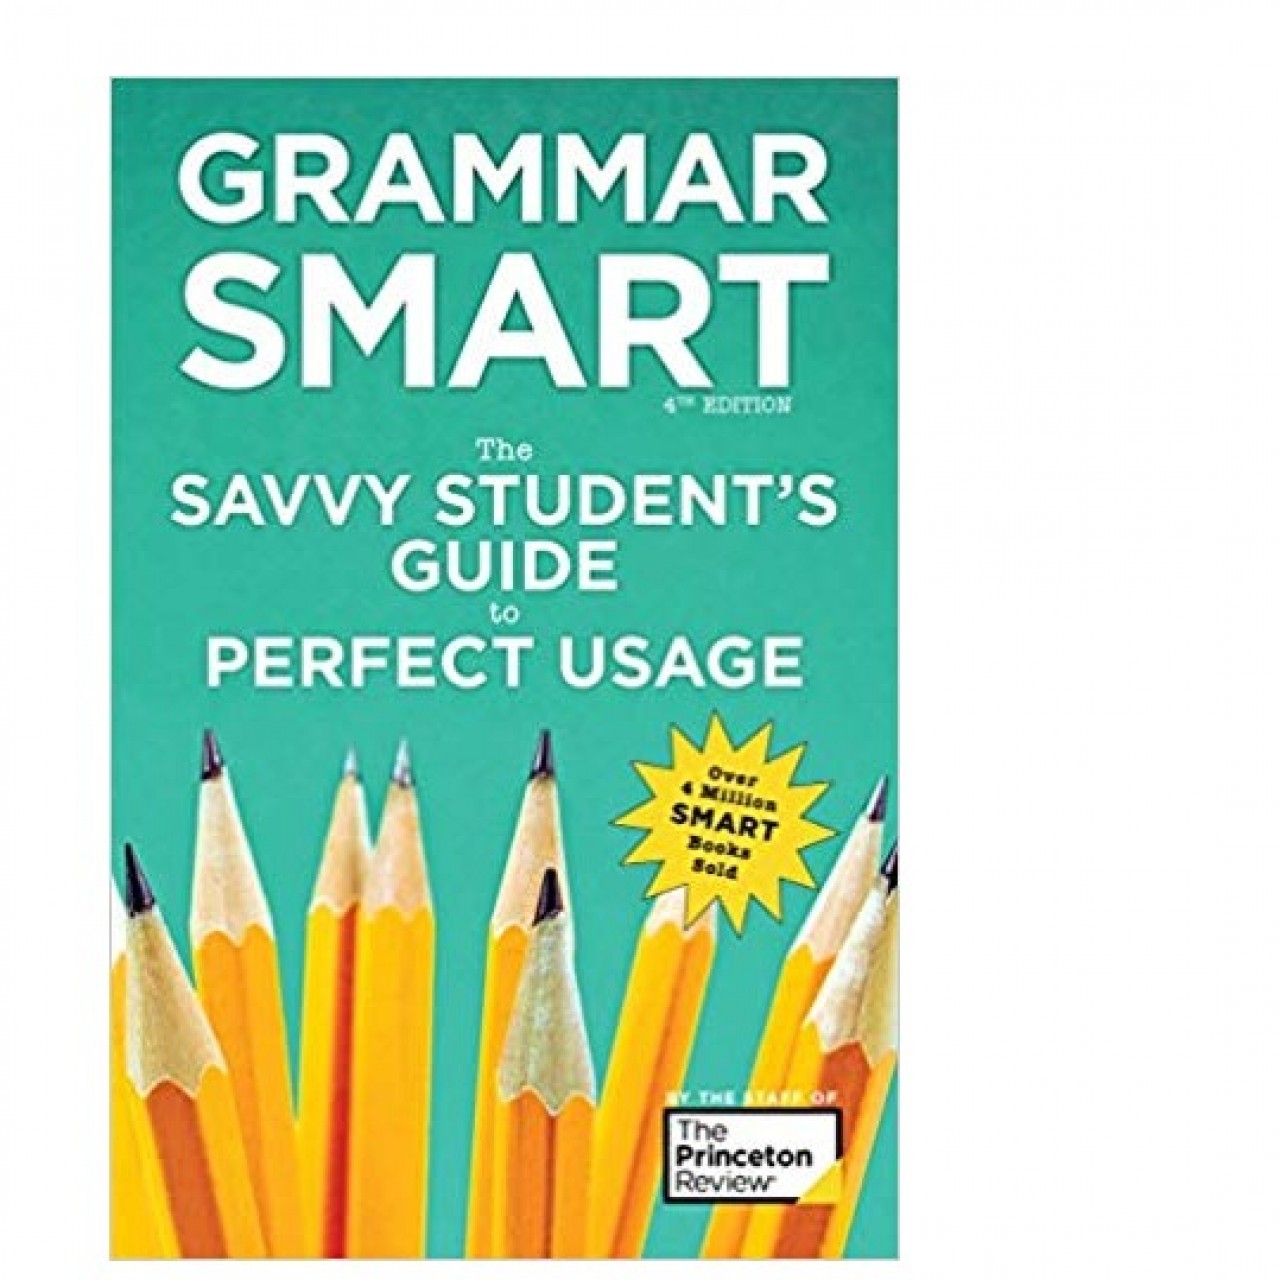 Grammar Smart: The Savvy Student's Guide to Perfect Usage (4Th Edition)